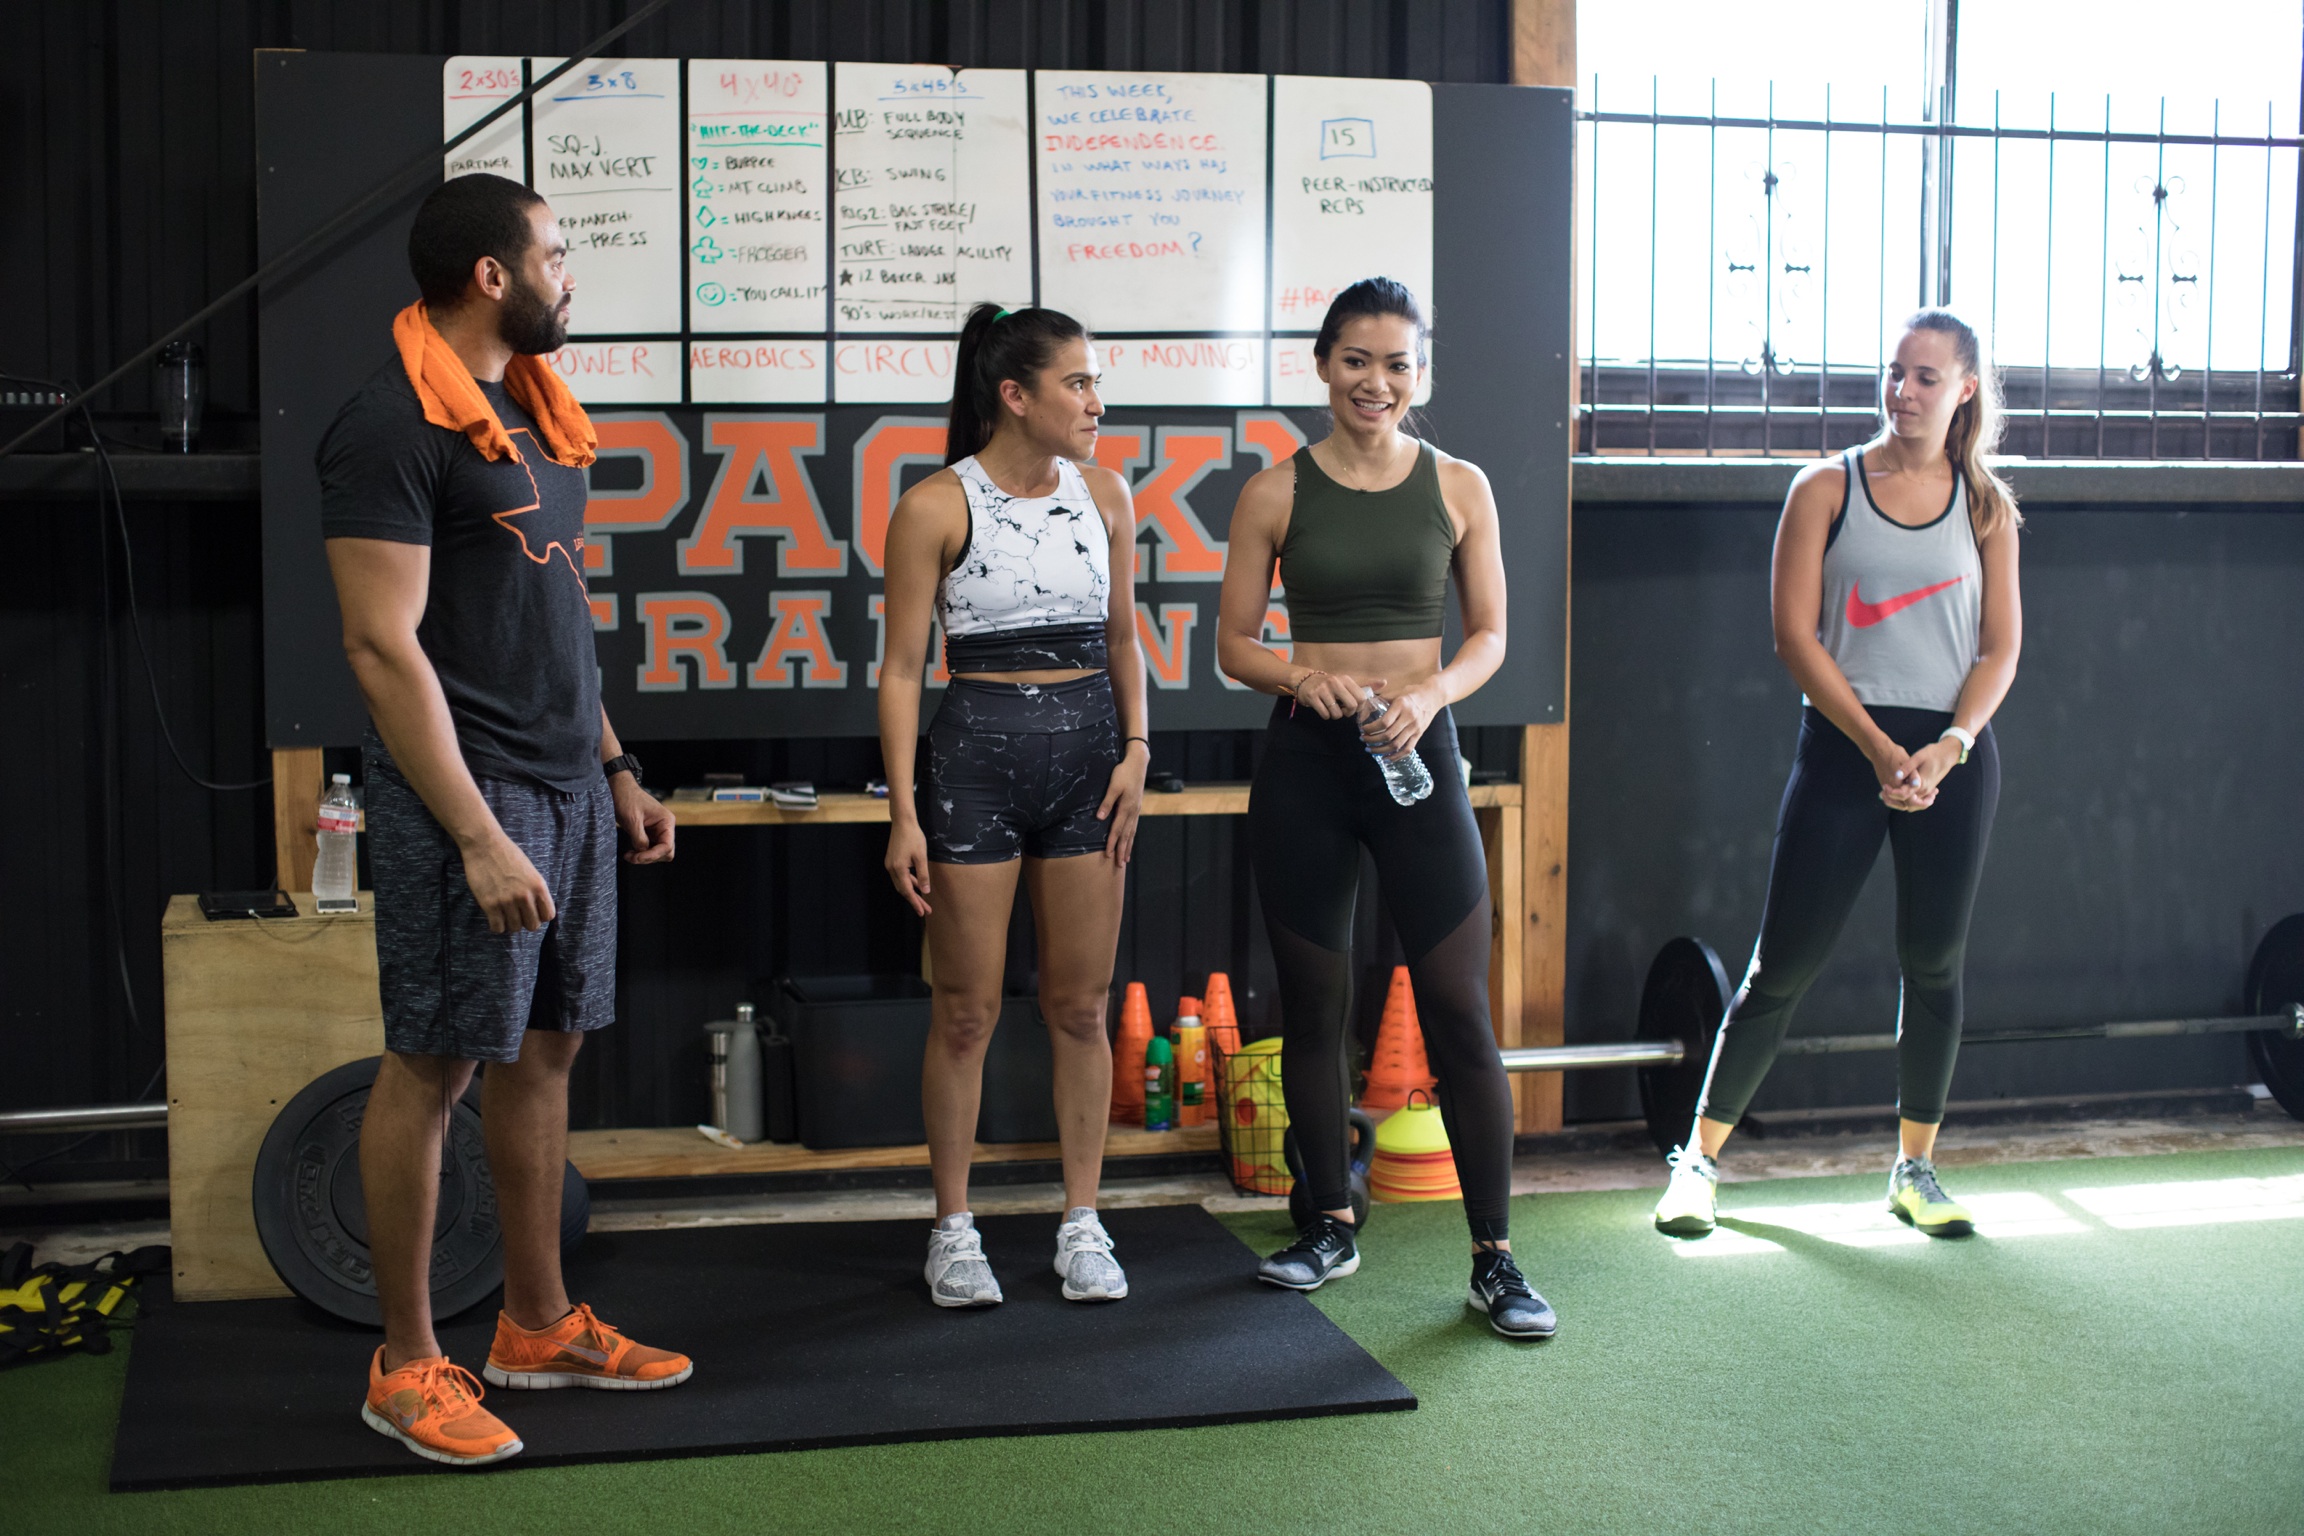  Starla and I introducing Terry, owner of The League, and Marlee, before they kick our butts with a PAC(K) Training class, which combines strength training and conditioning exercises! 